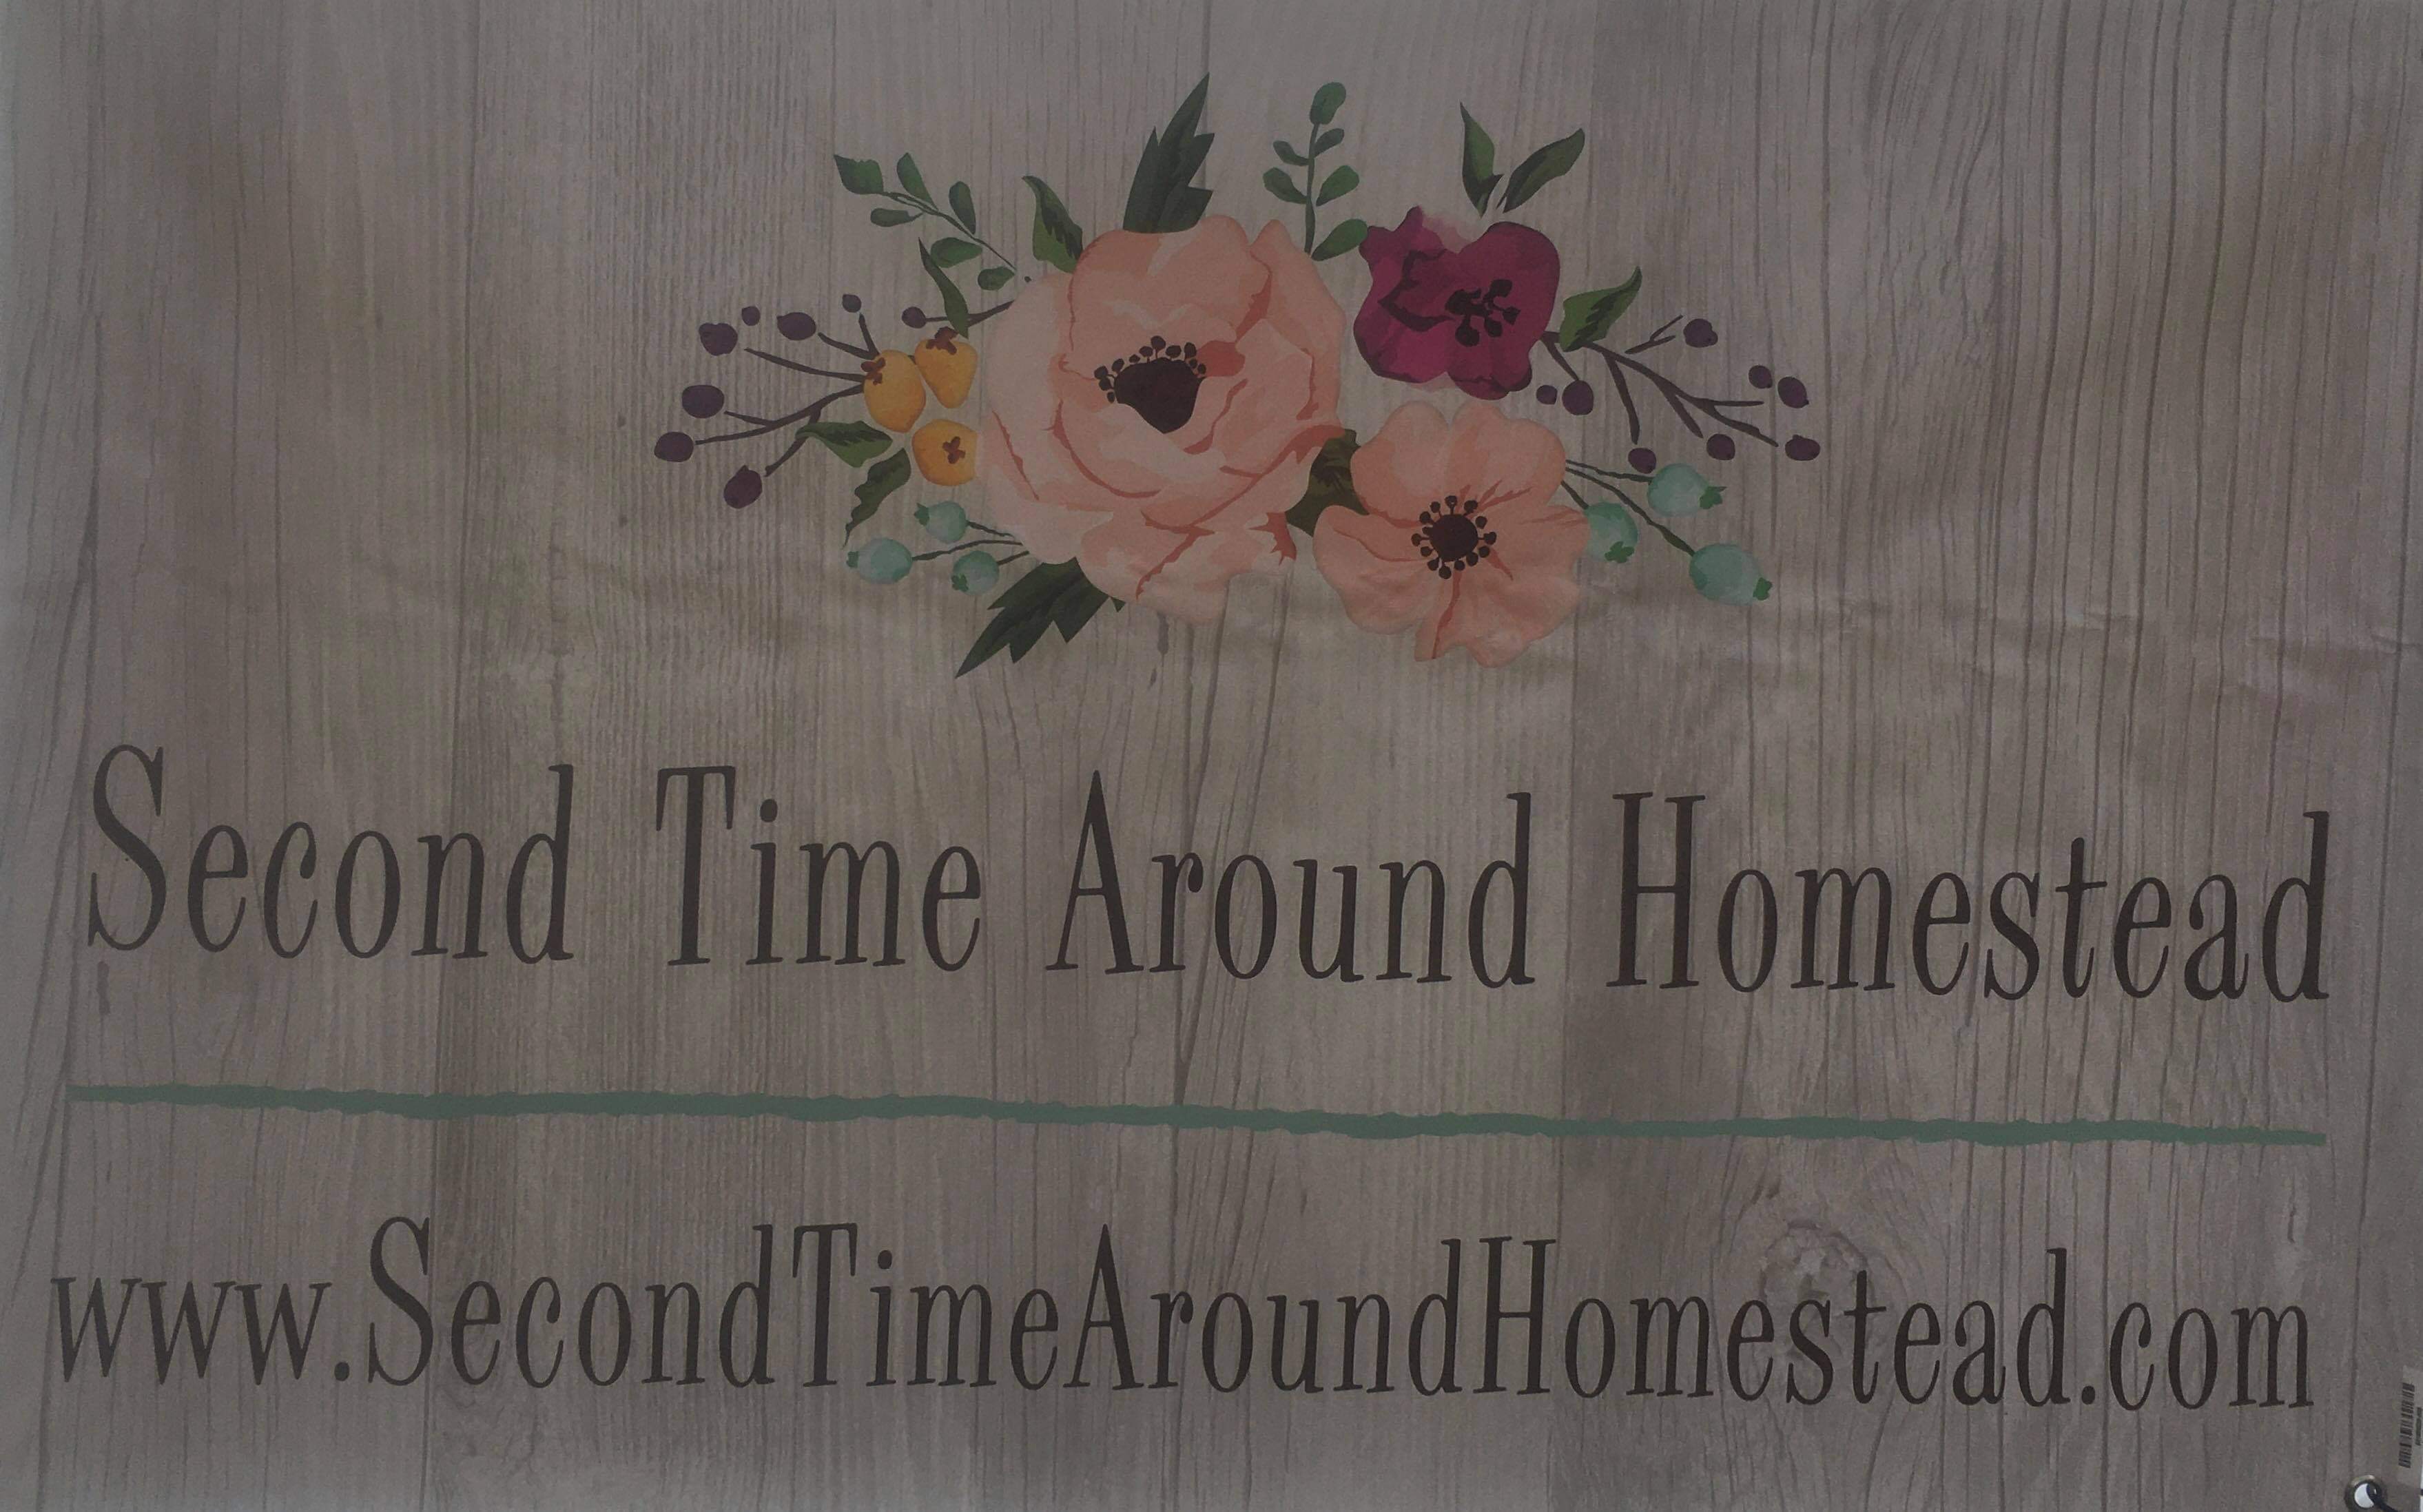 wooden background with flowers painted on and the name "Second Time Around Homestead"